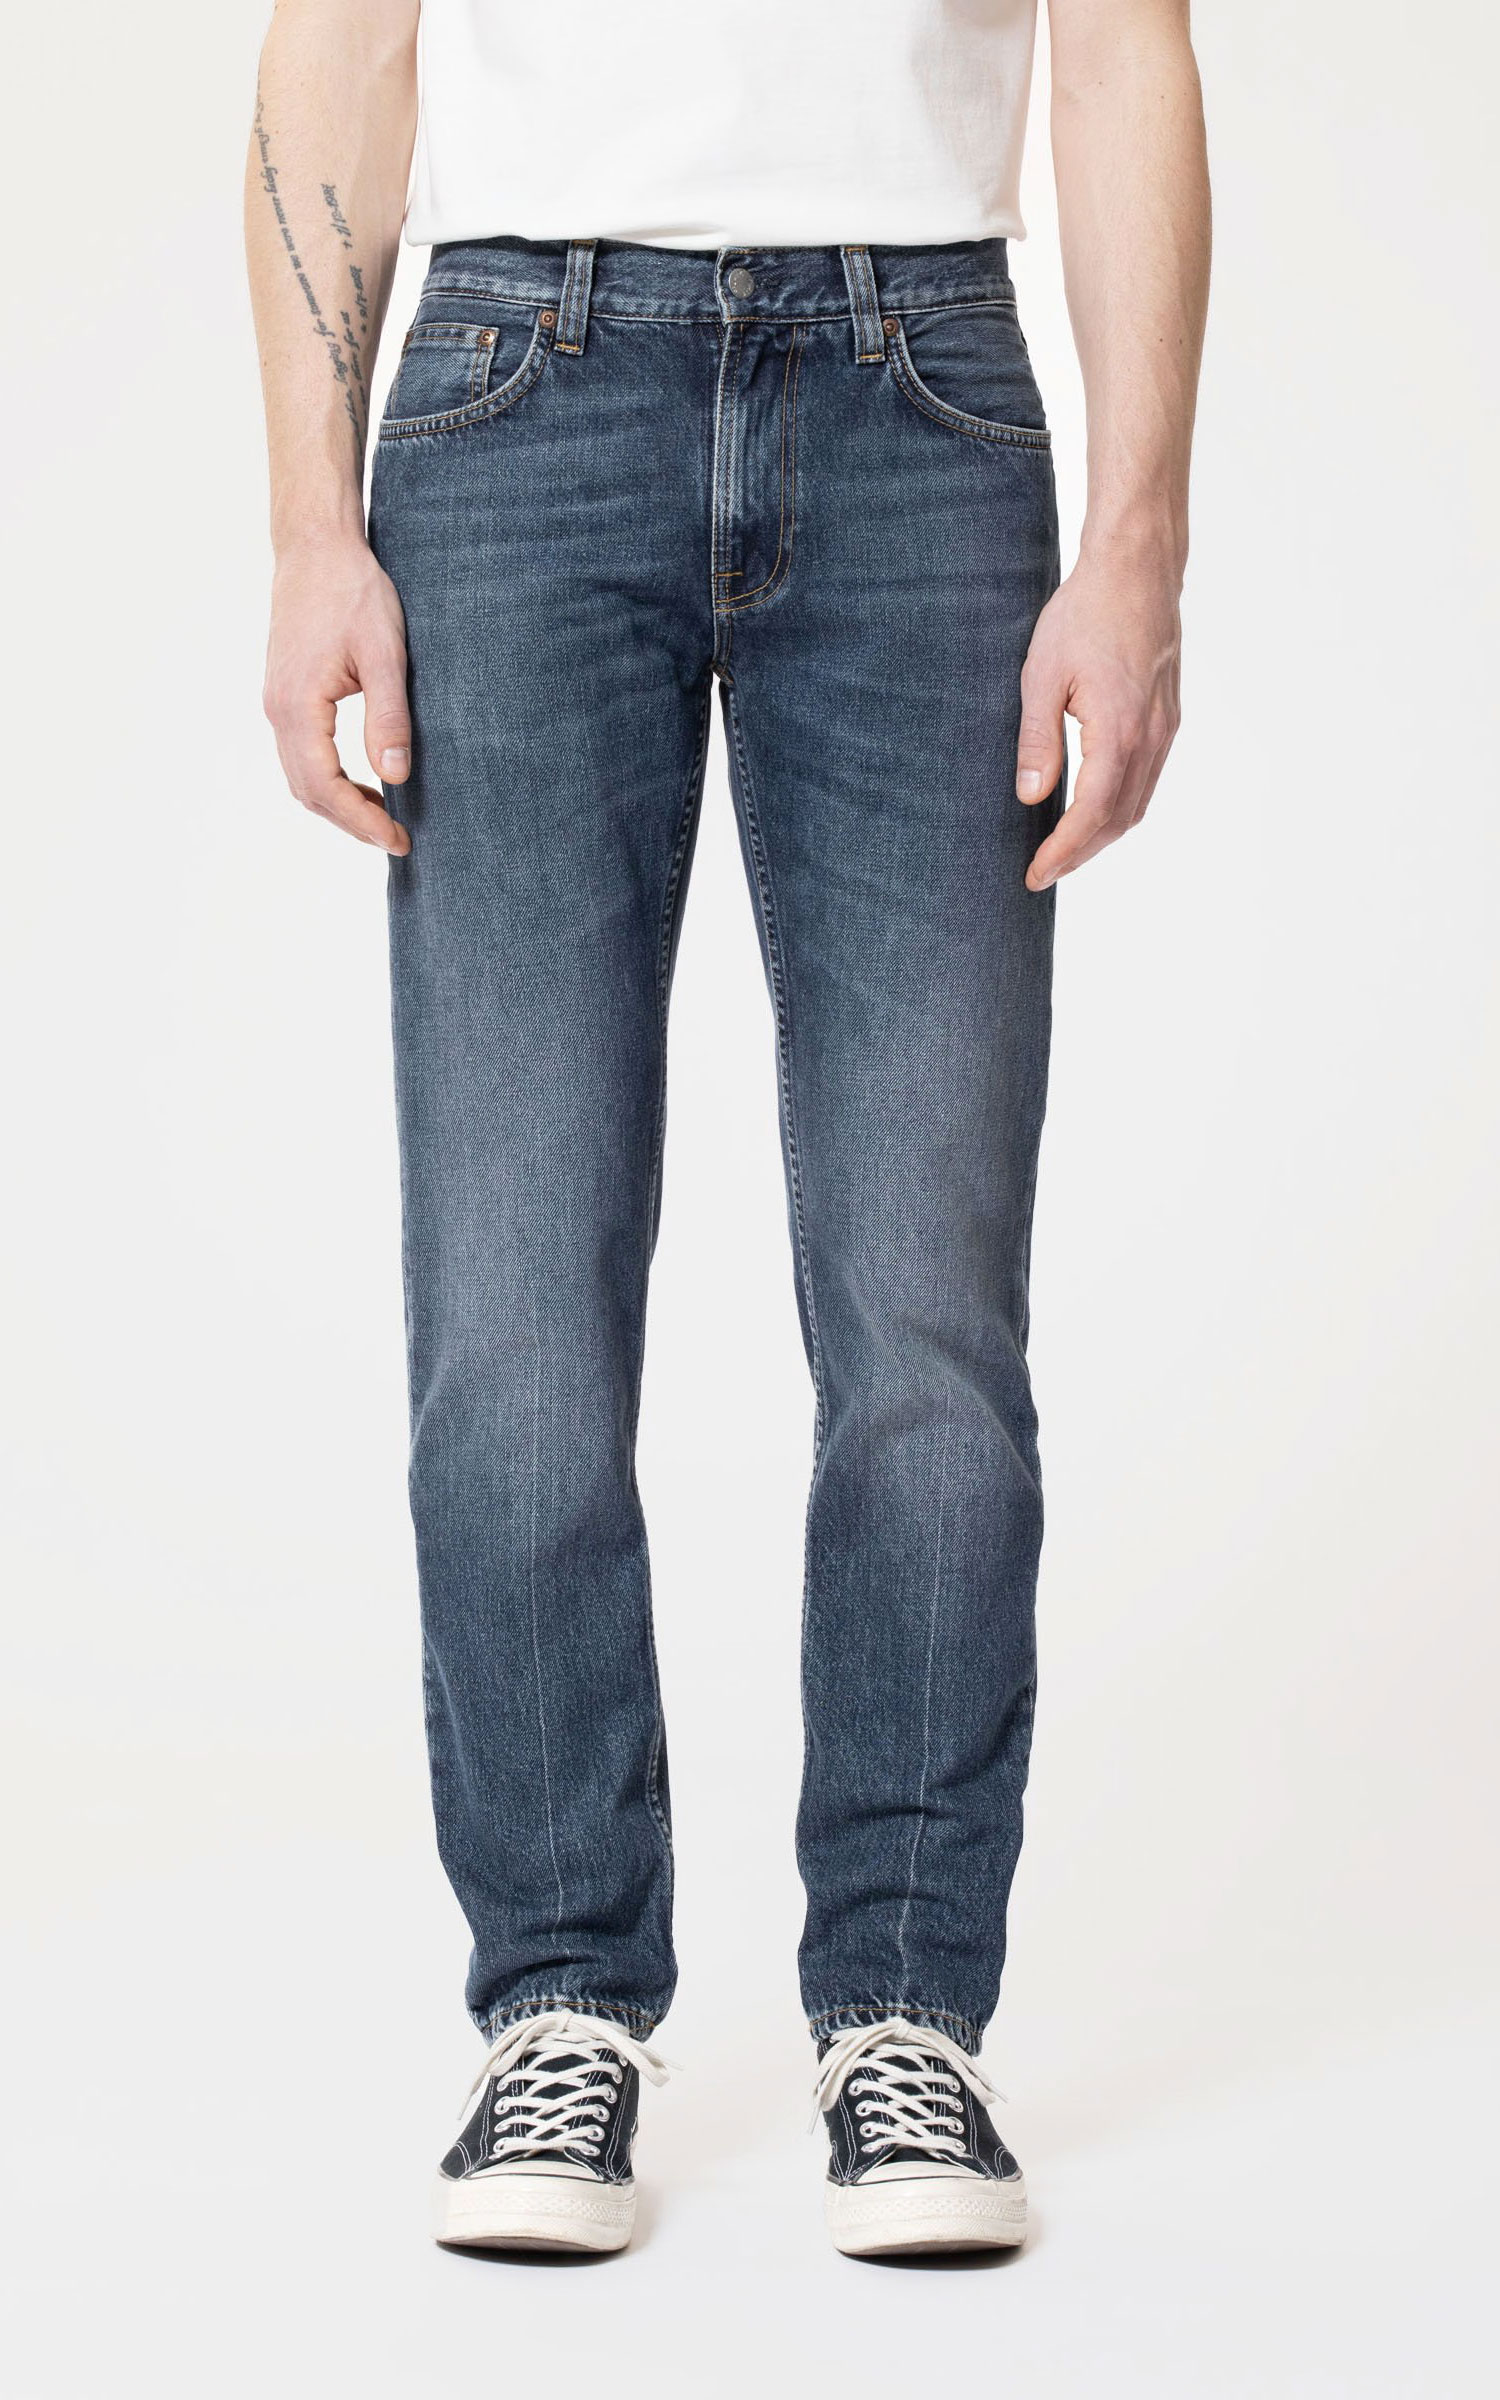 Nudie Jeans Gritty Jackson Press Creased | Cultizm